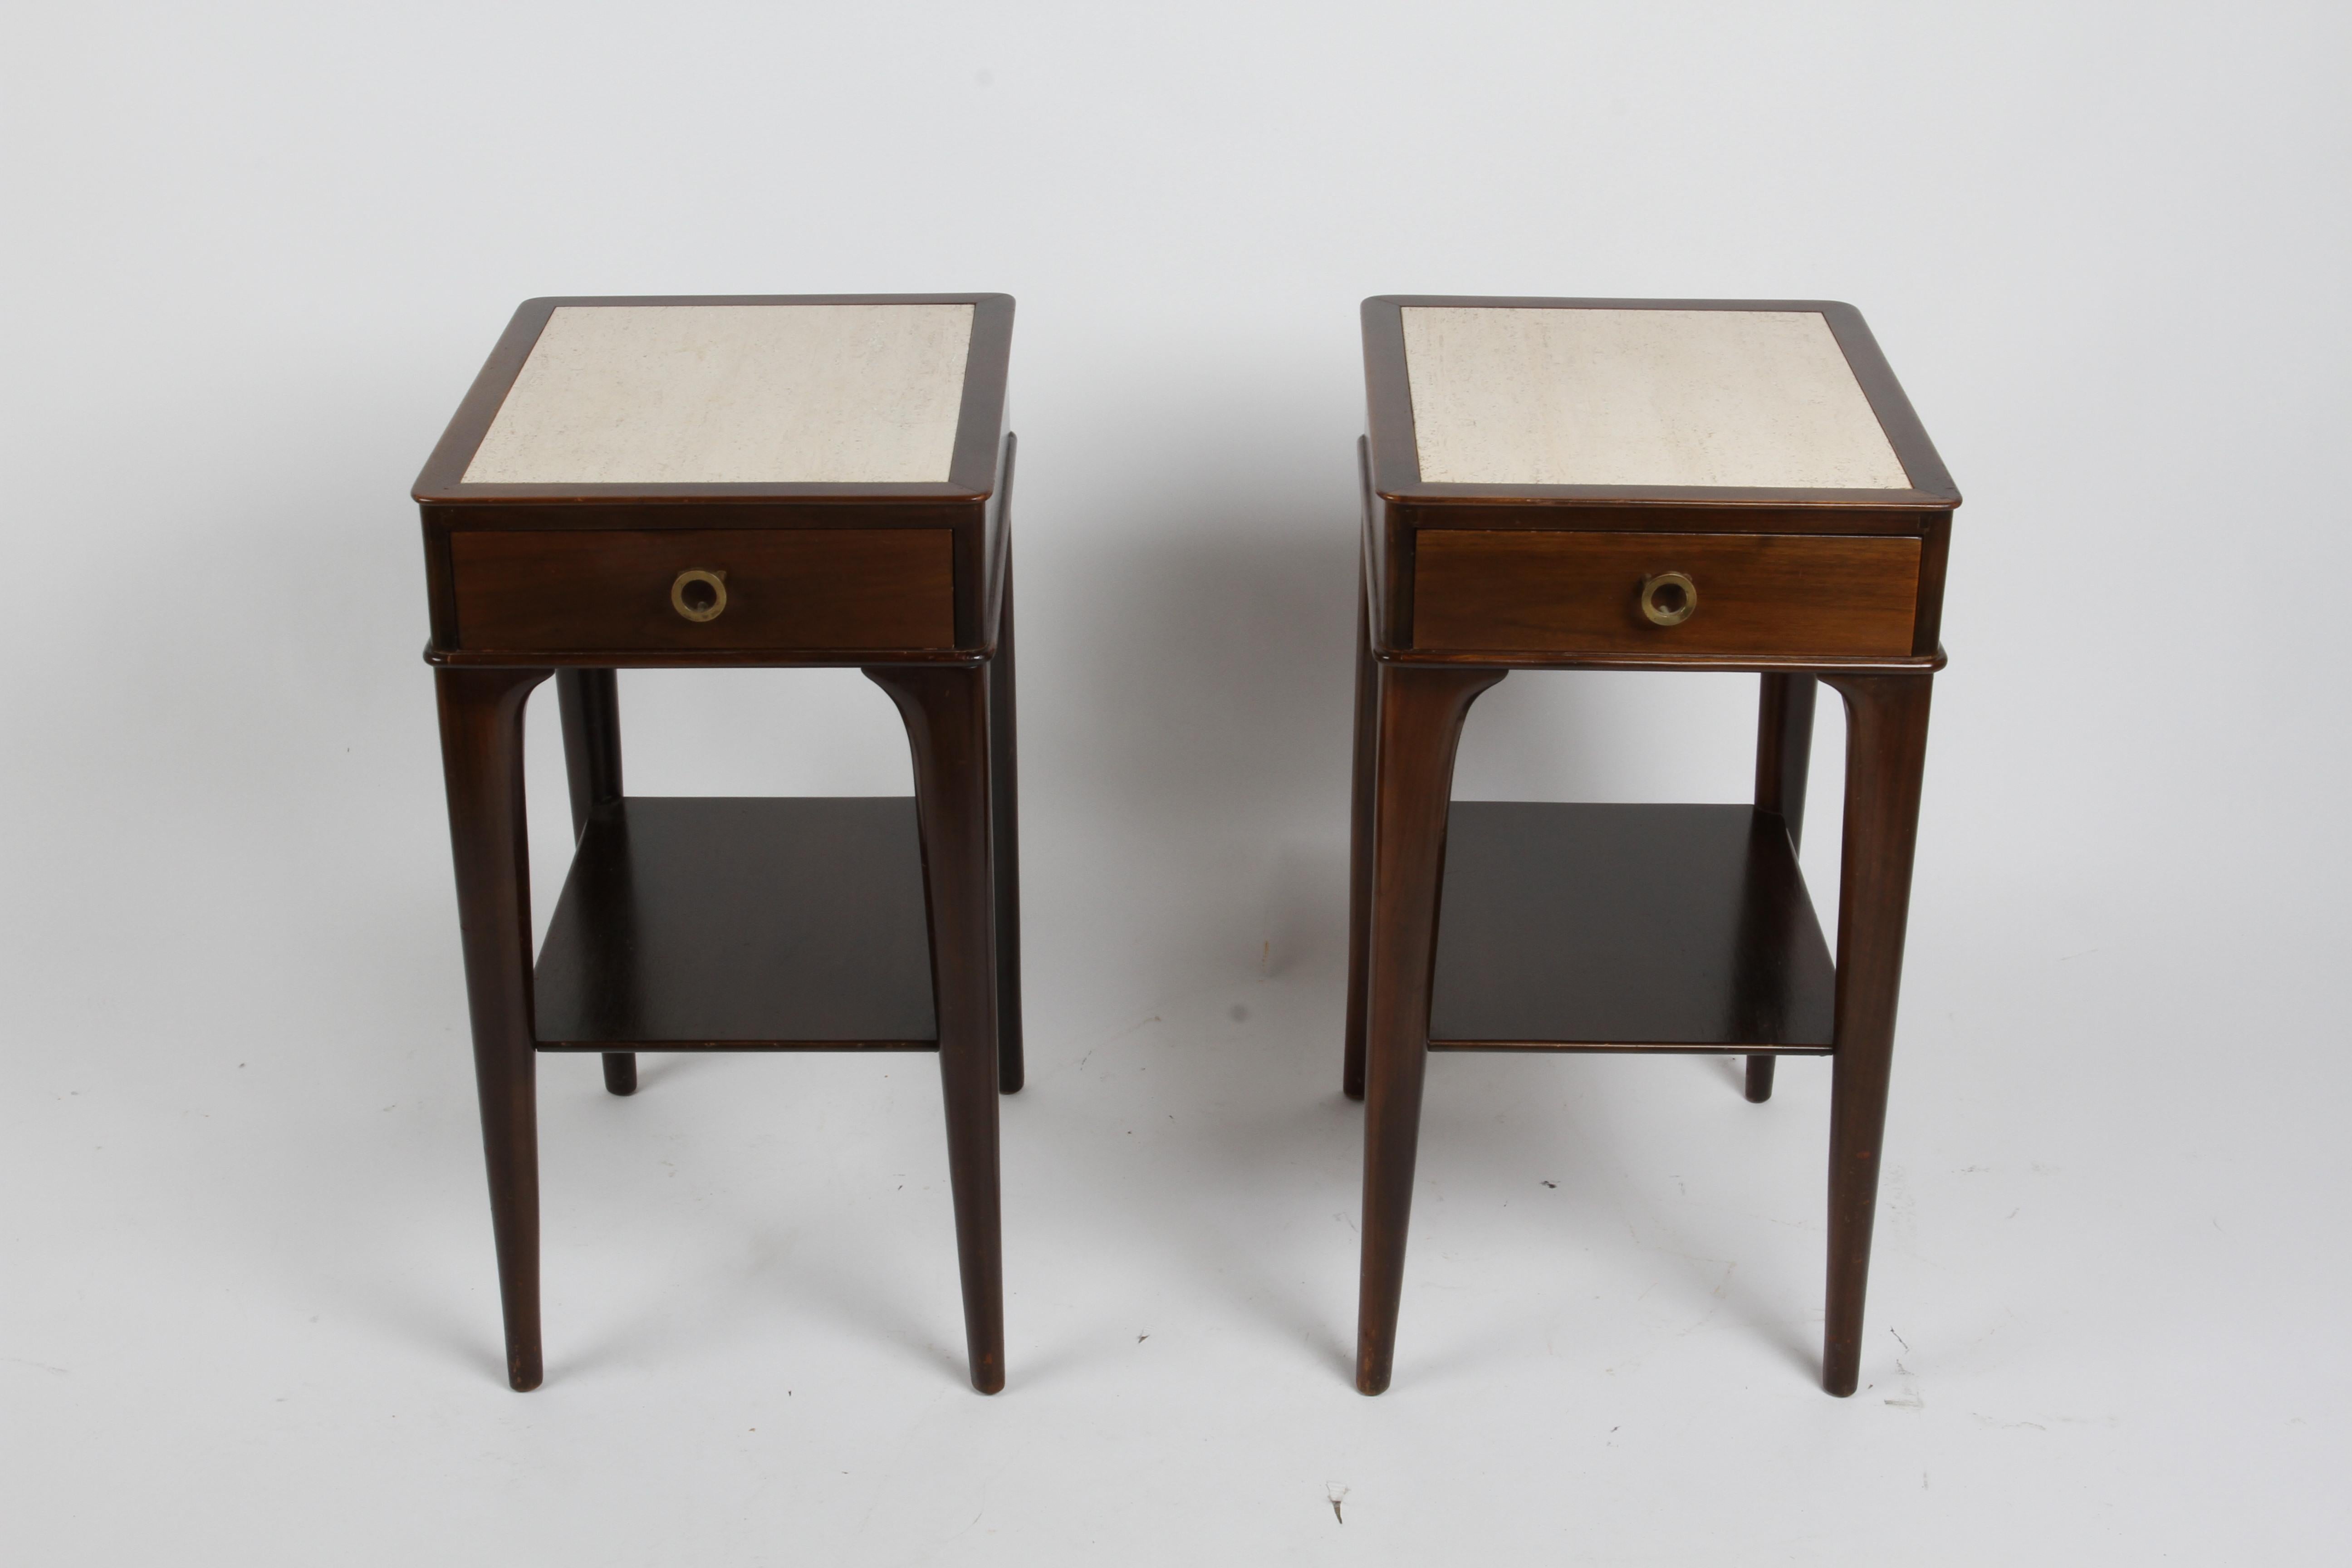 Rare and very elegant pair of nightstands or end tables designed by Edward Wormley in dark stained mahogany with travertine tops, single drawer has open circular brass pull, from his Dunbar for Modern collection. 
No labels but shown in my Dunbar